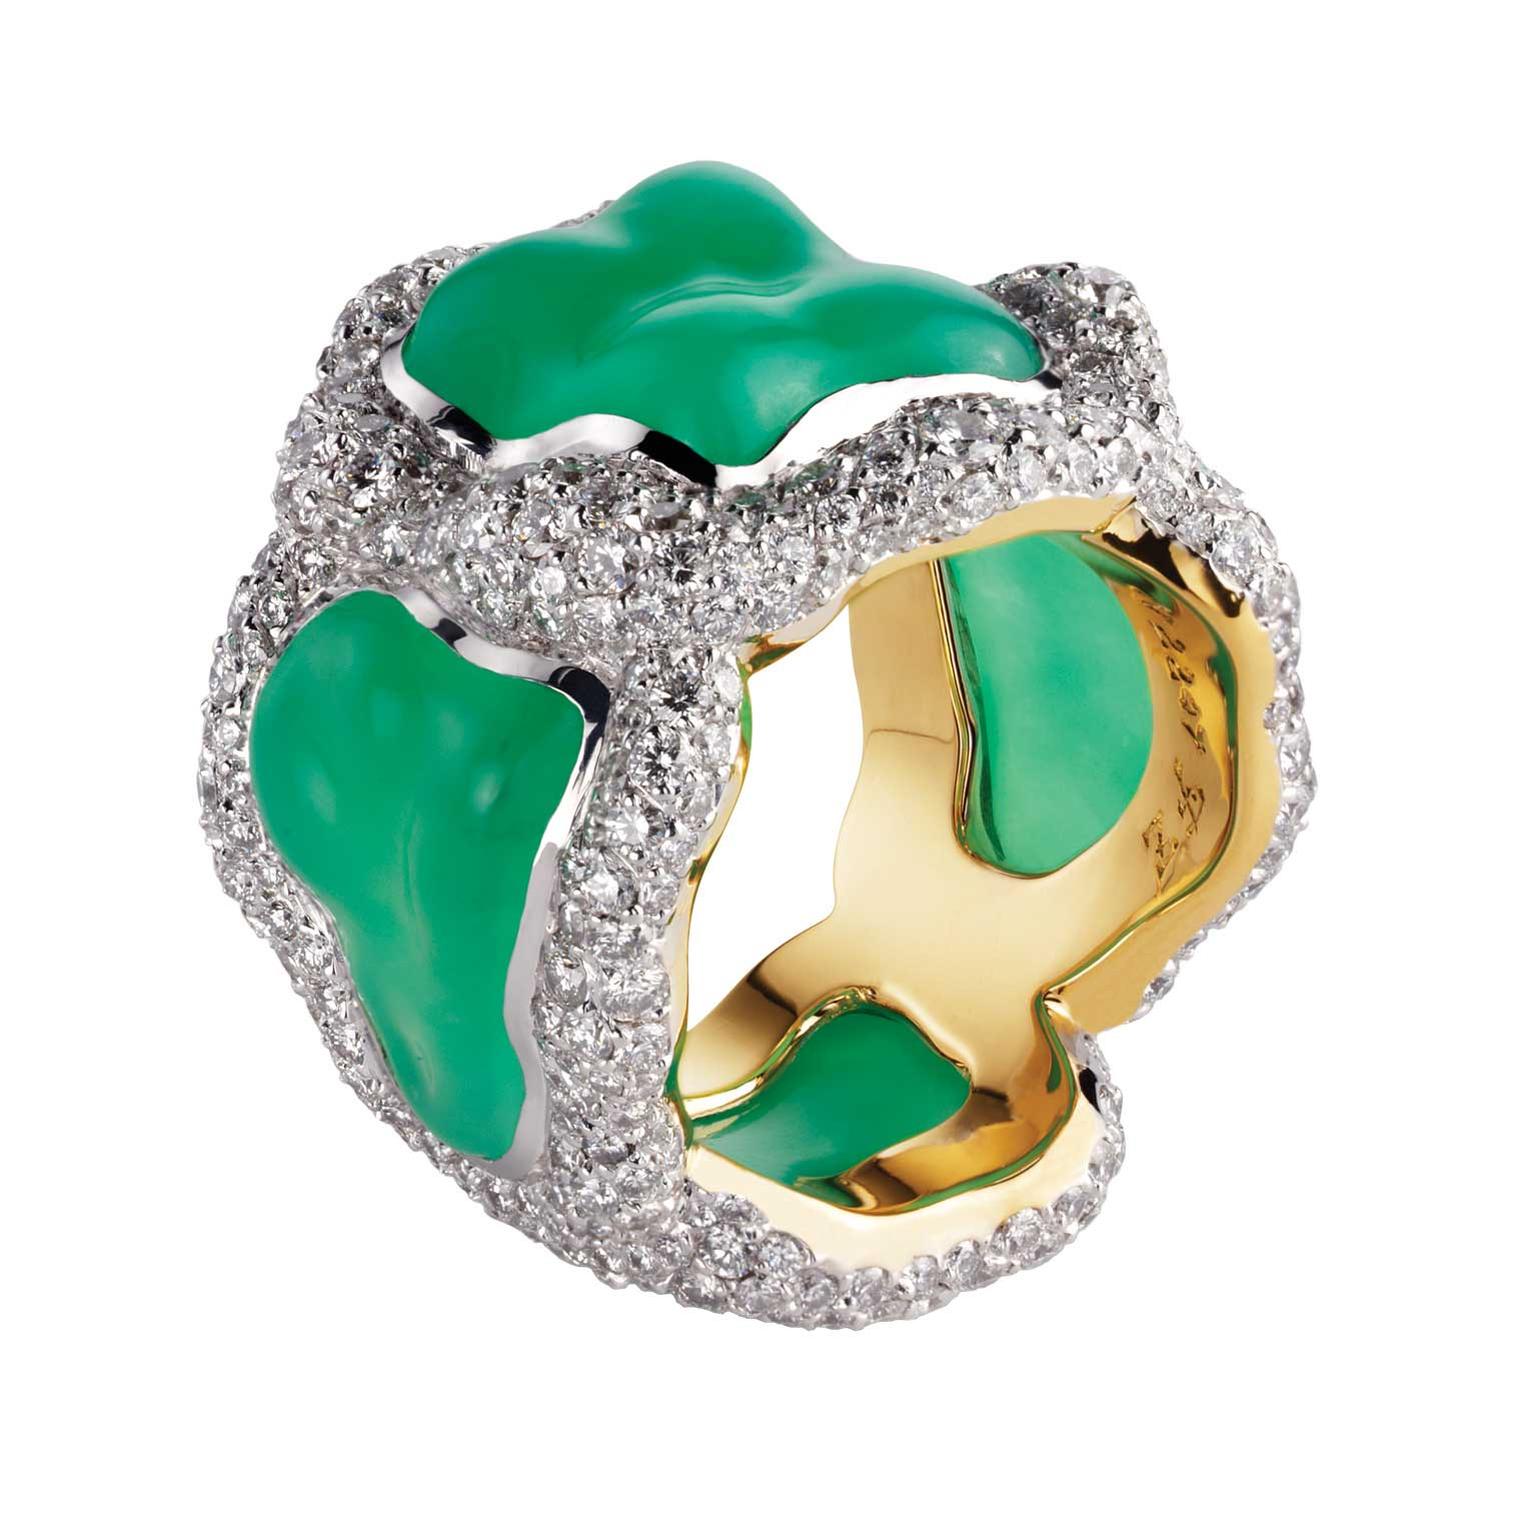 Fabergé Katya chrysoprase ring in white and yellow gold with diamonds